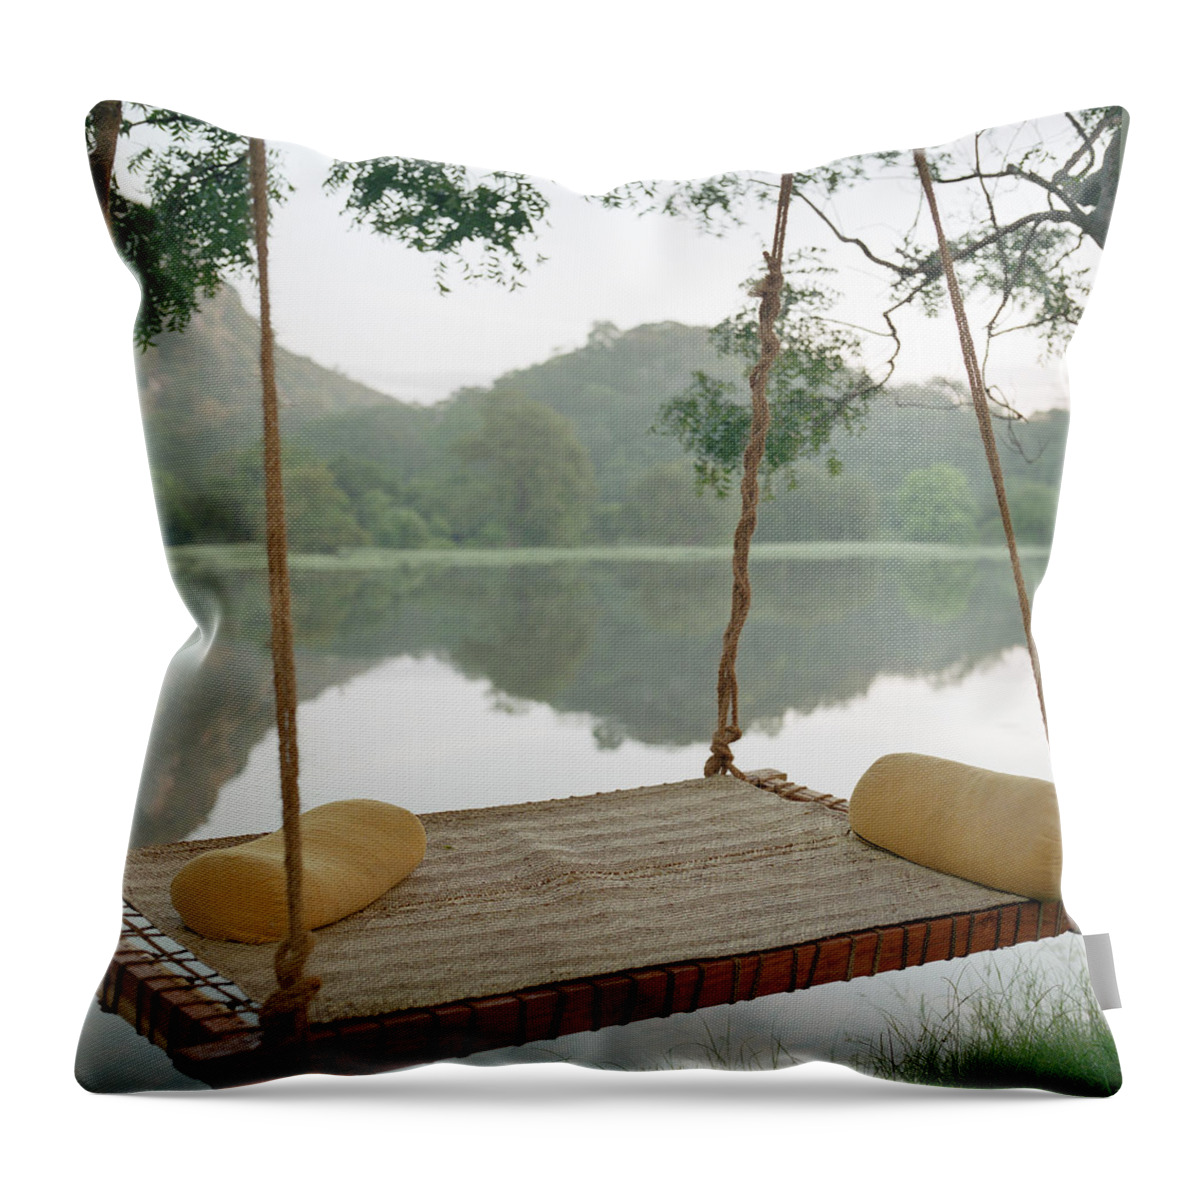 Tranquility Throw Pillow featuring the photograph Hammock On Tree By Still Rural Lake by Laurie Castelli